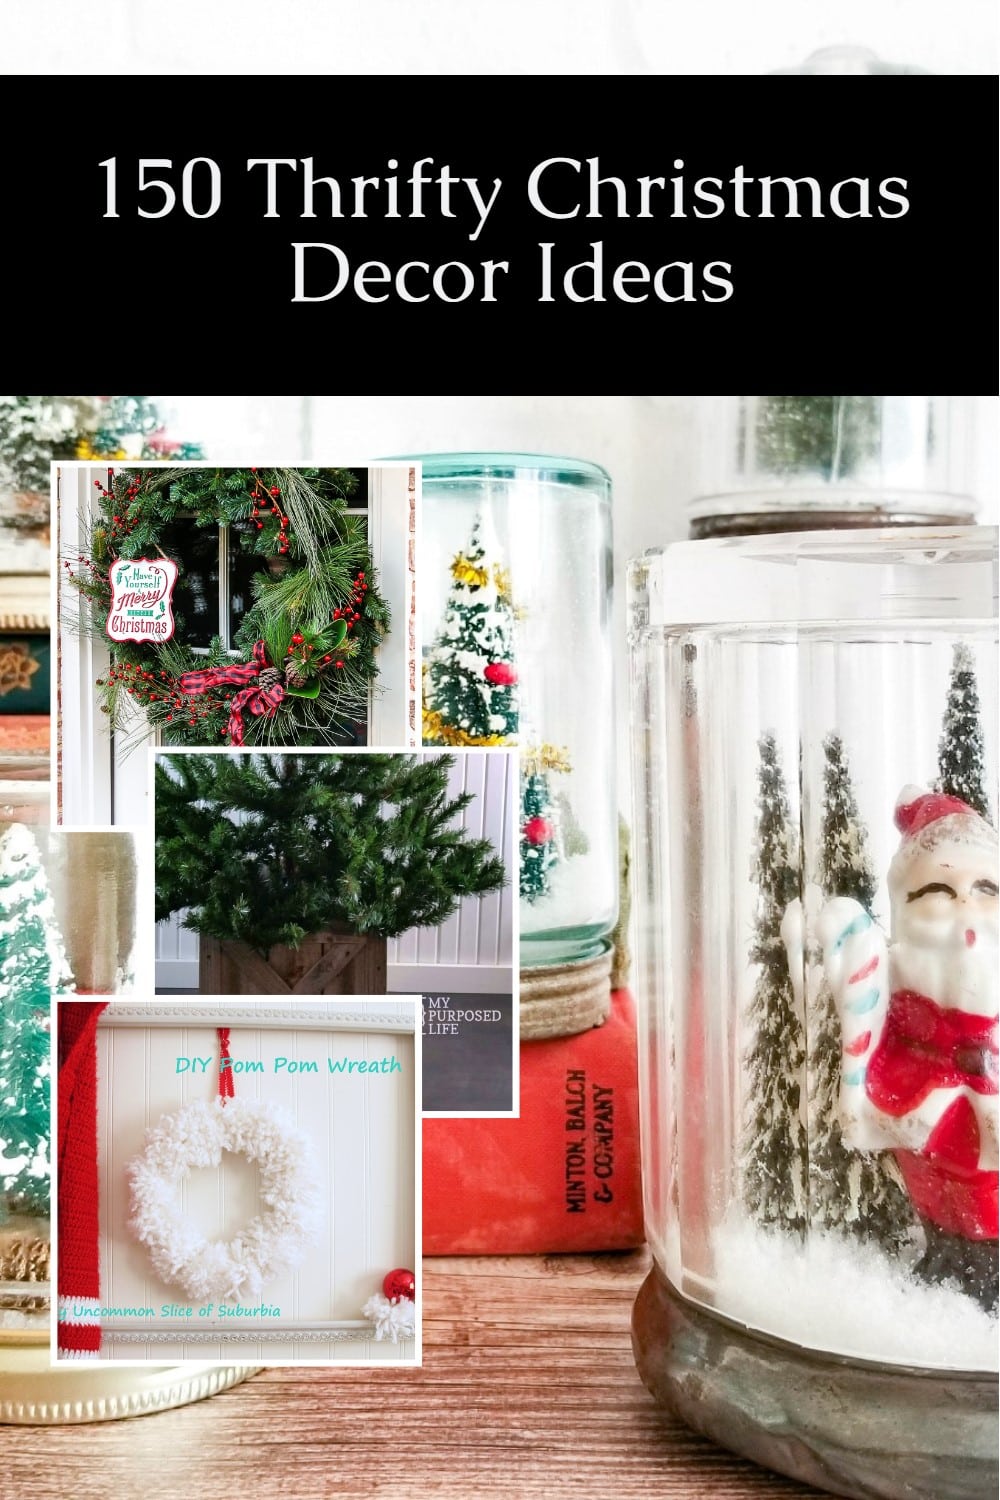 This collection of over 150 trash to treasure Christmas Decor Ideas from 7 top DIY bloggers will have you trying to decide what to make first. #MyRepurposedLife #repurposed #trashtotreasure #christmas #decor #ideas via @repurposedlife